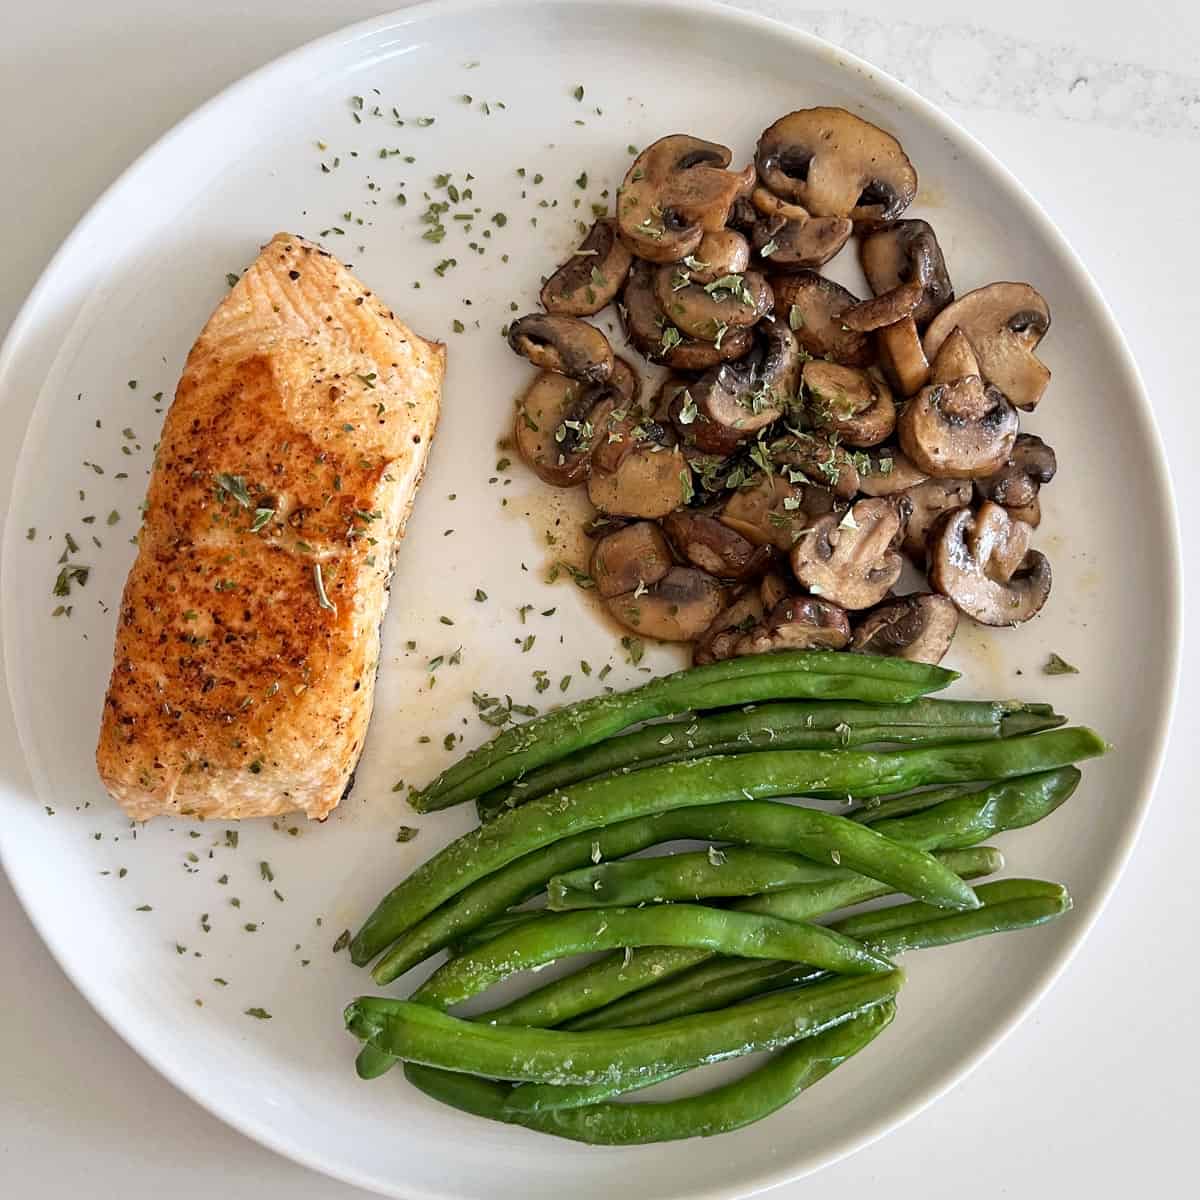 Sauteed mushrooms are served with green beans and salmon.